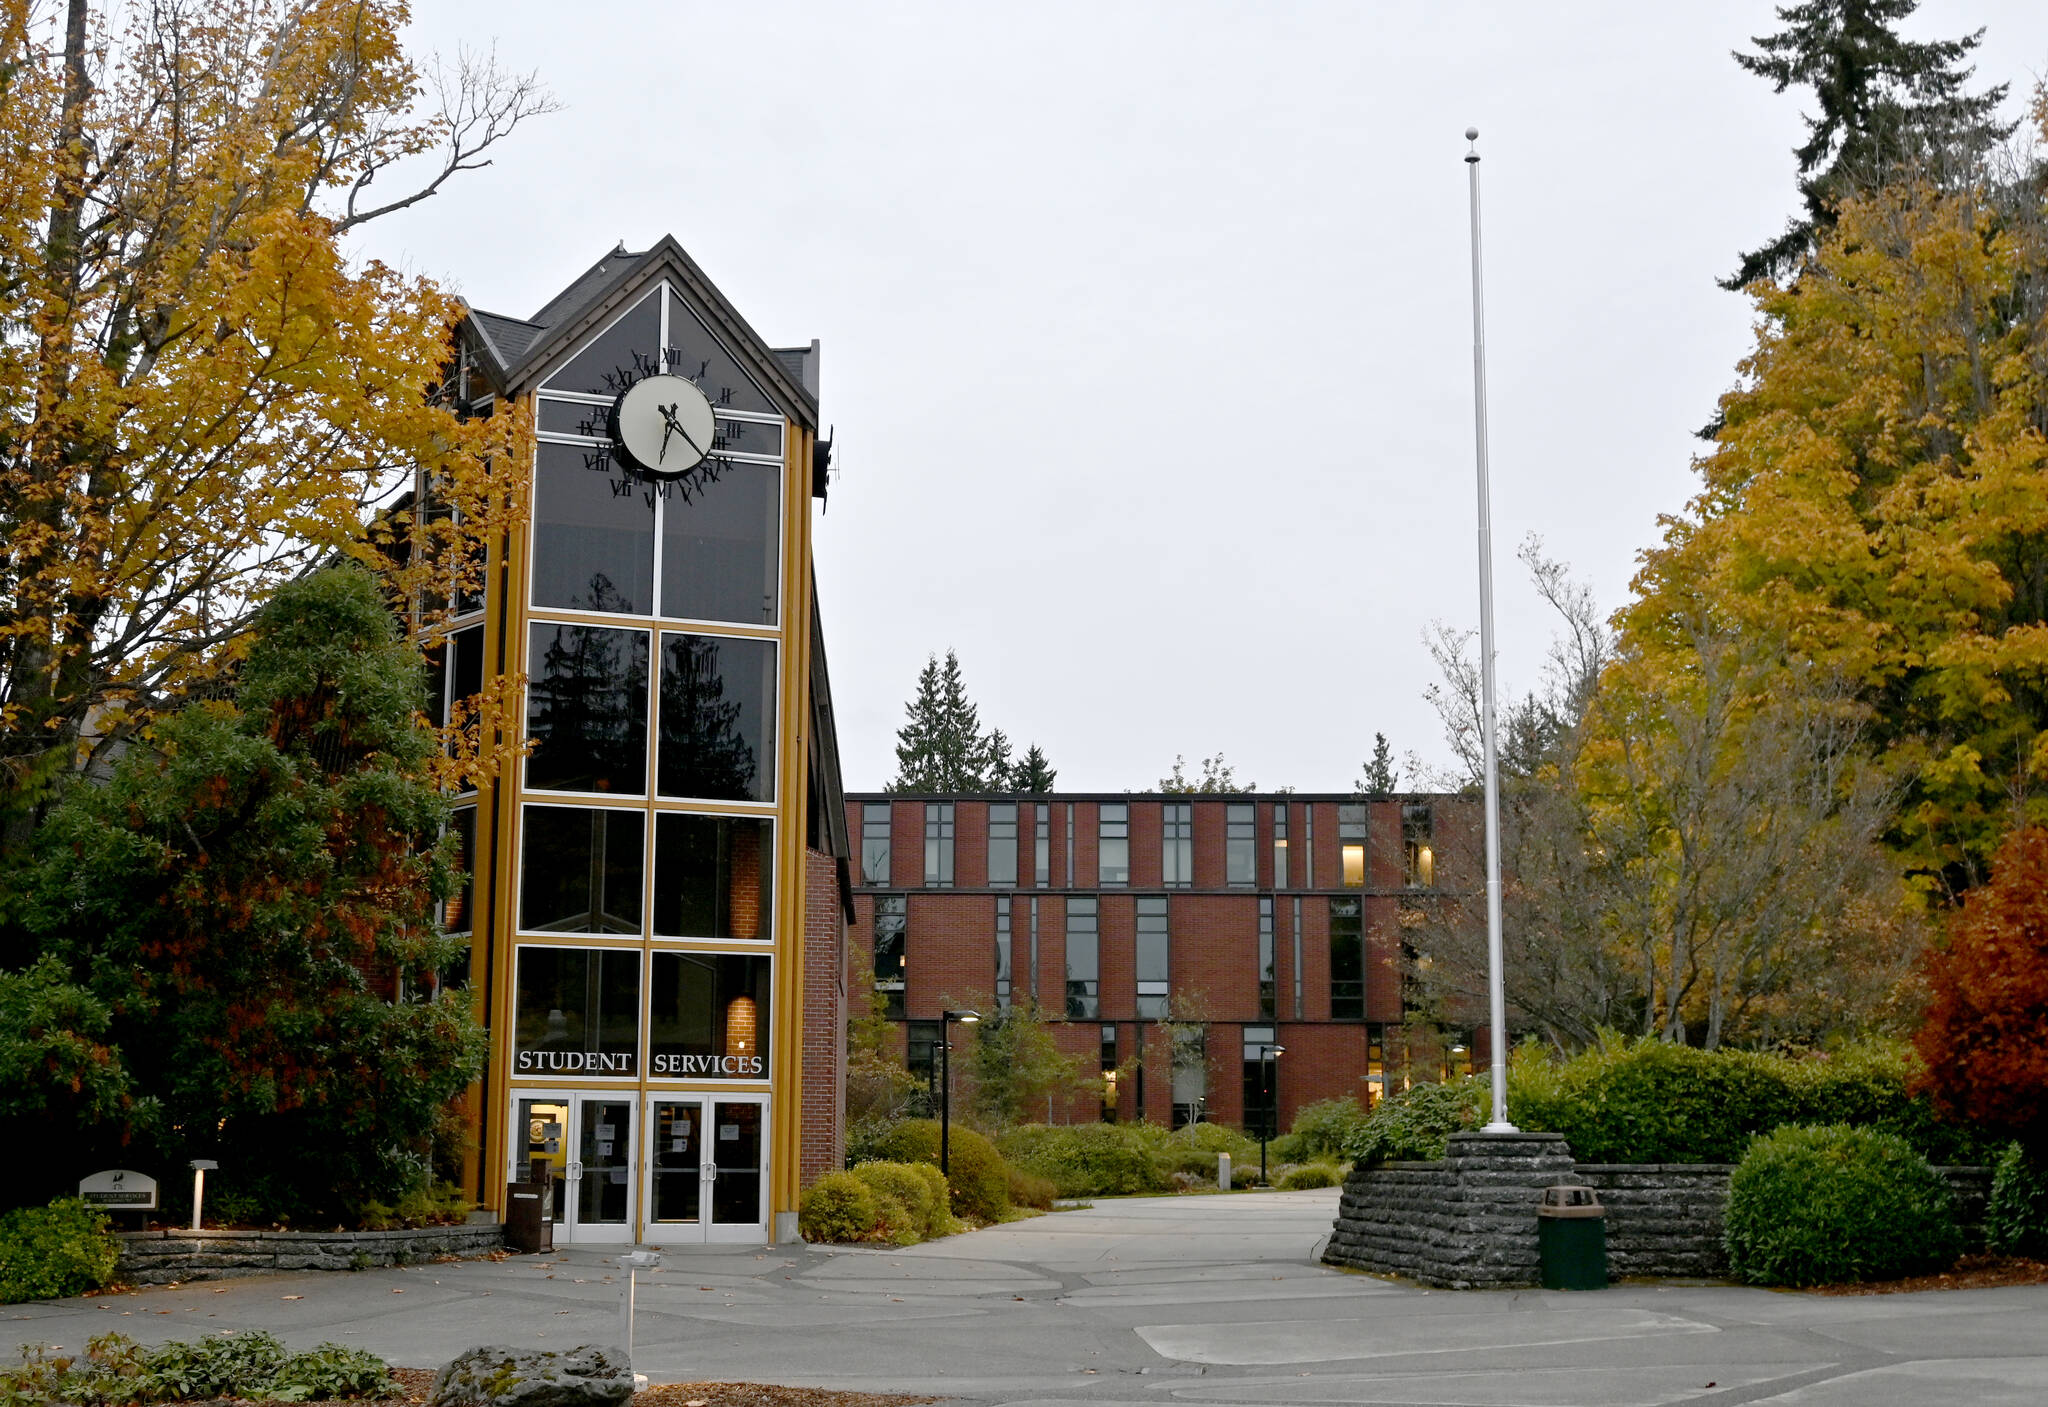 The Peninsua College campus in Port Angeles. (Michael Dashiell/Olympic Peninsula News Group file)